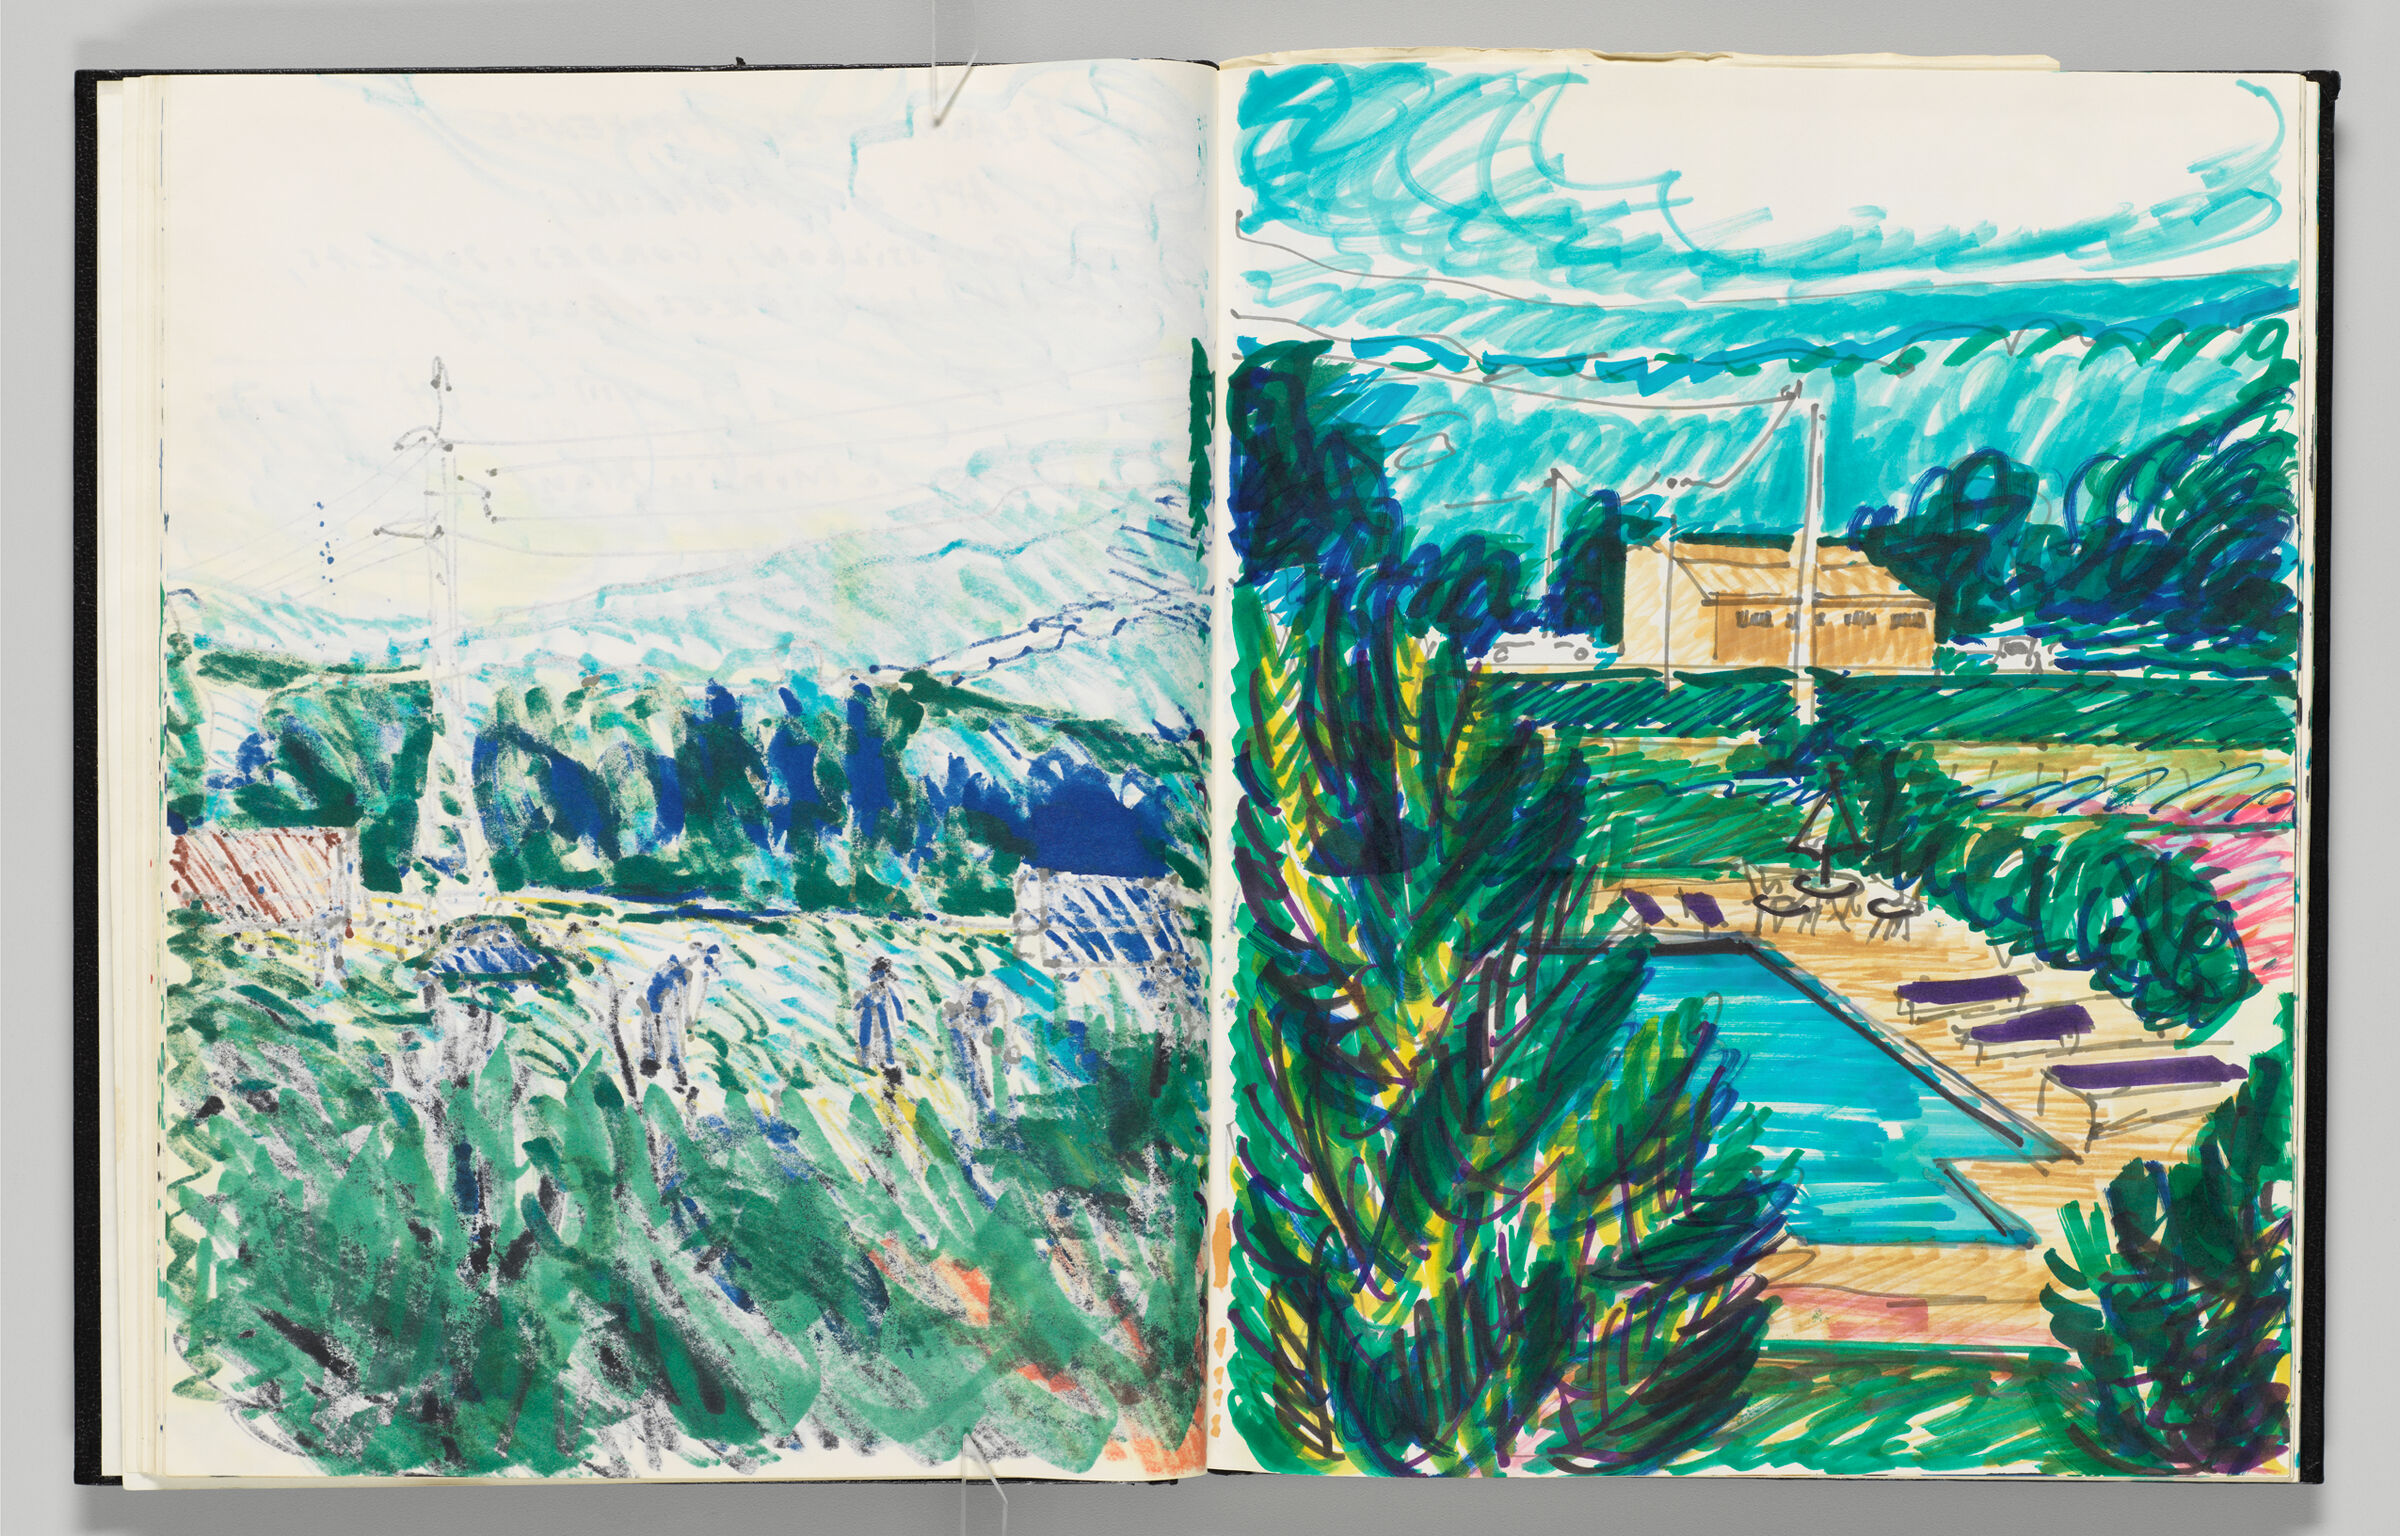 Untitled (Bleed-Through Of Previous Page, Left Page); Untitled (Pool Amidst Landscape, Right Page)